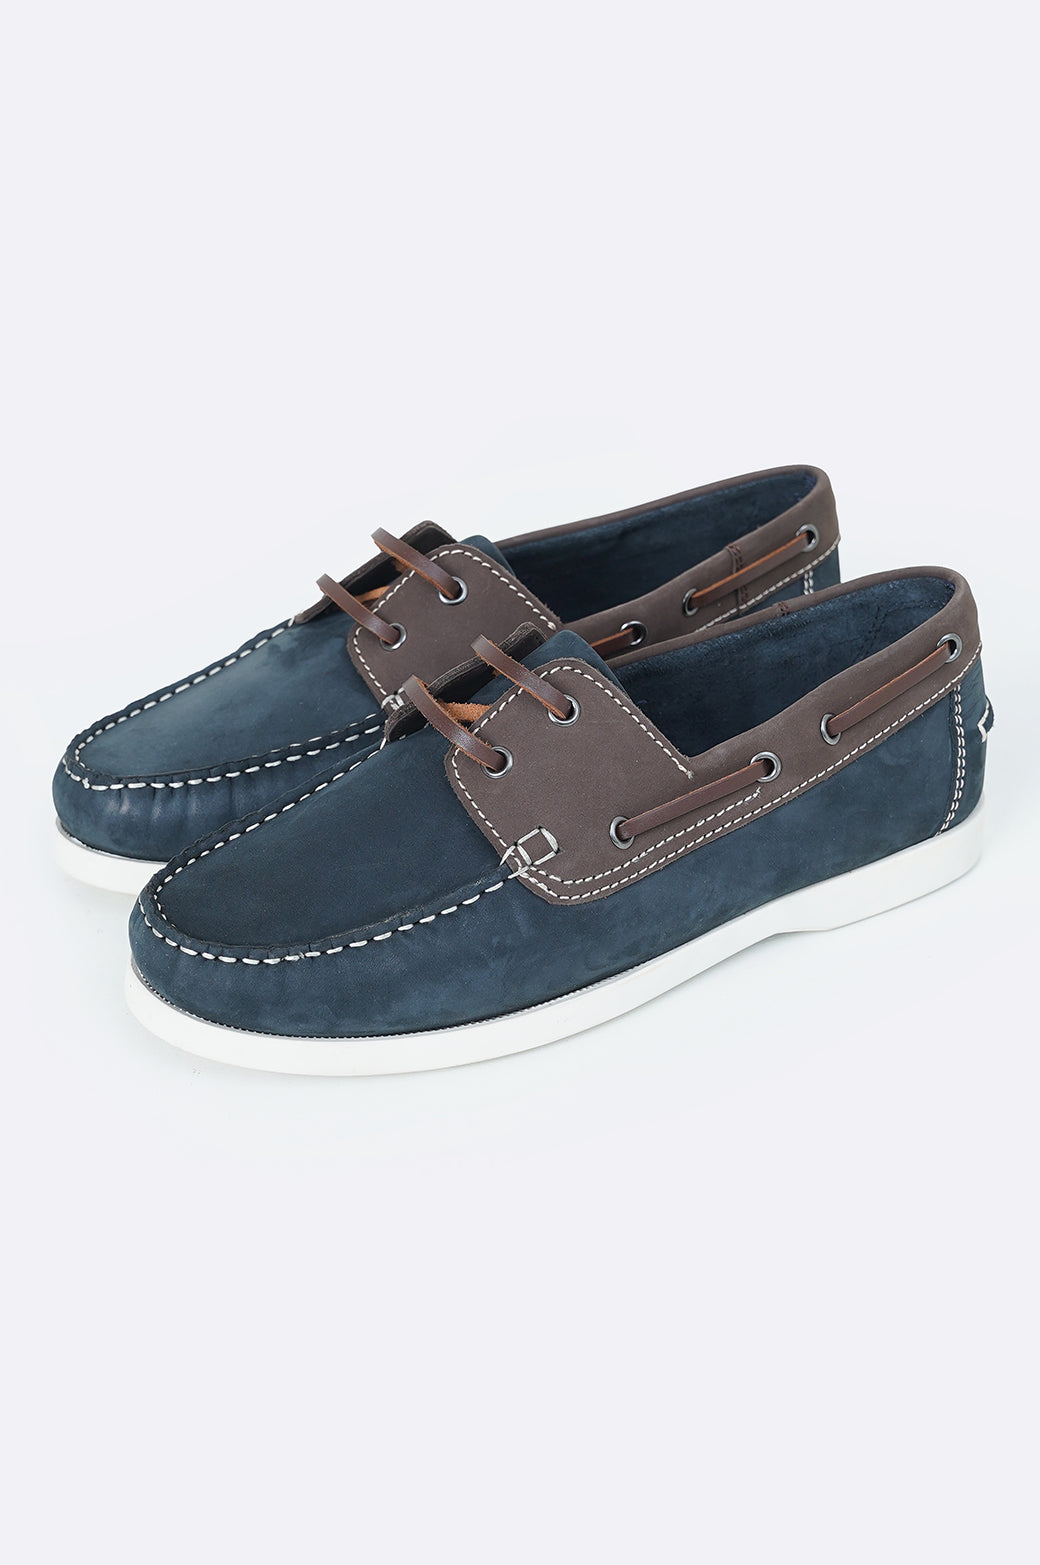 CONTRAST LEATHER BOAT SHOES